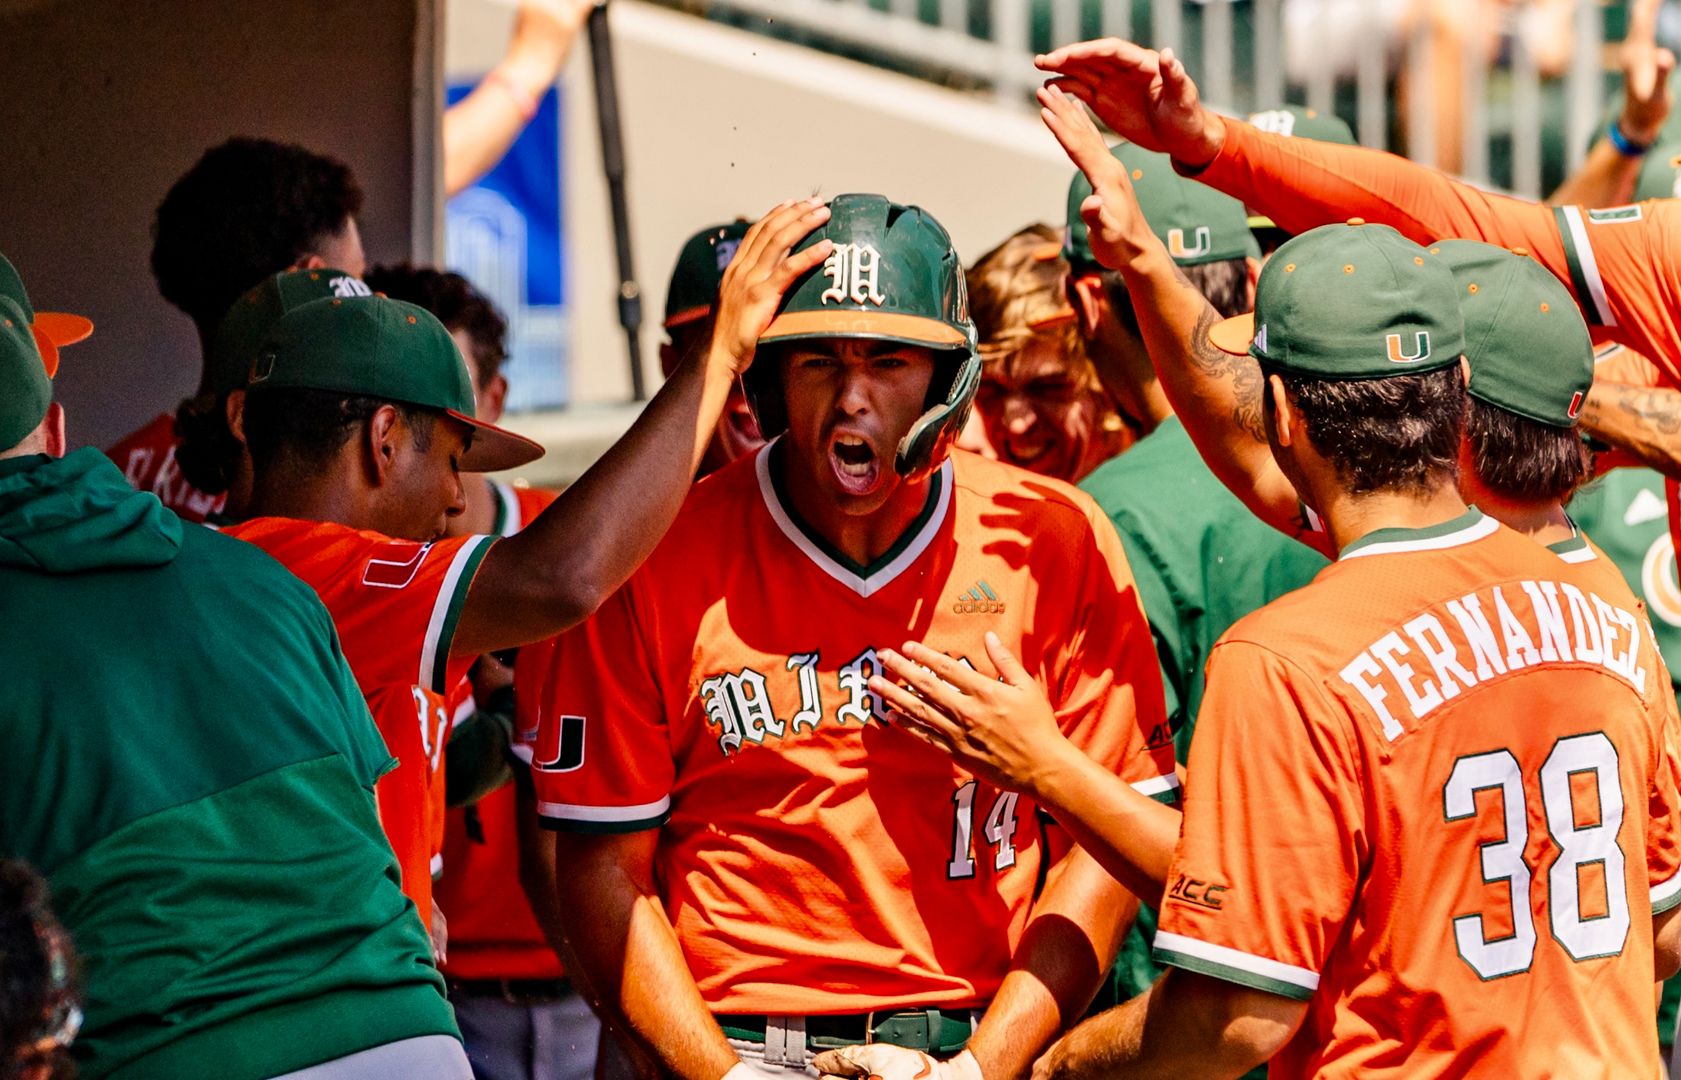 Cuvet leads Canes over Cardinals, 8-5